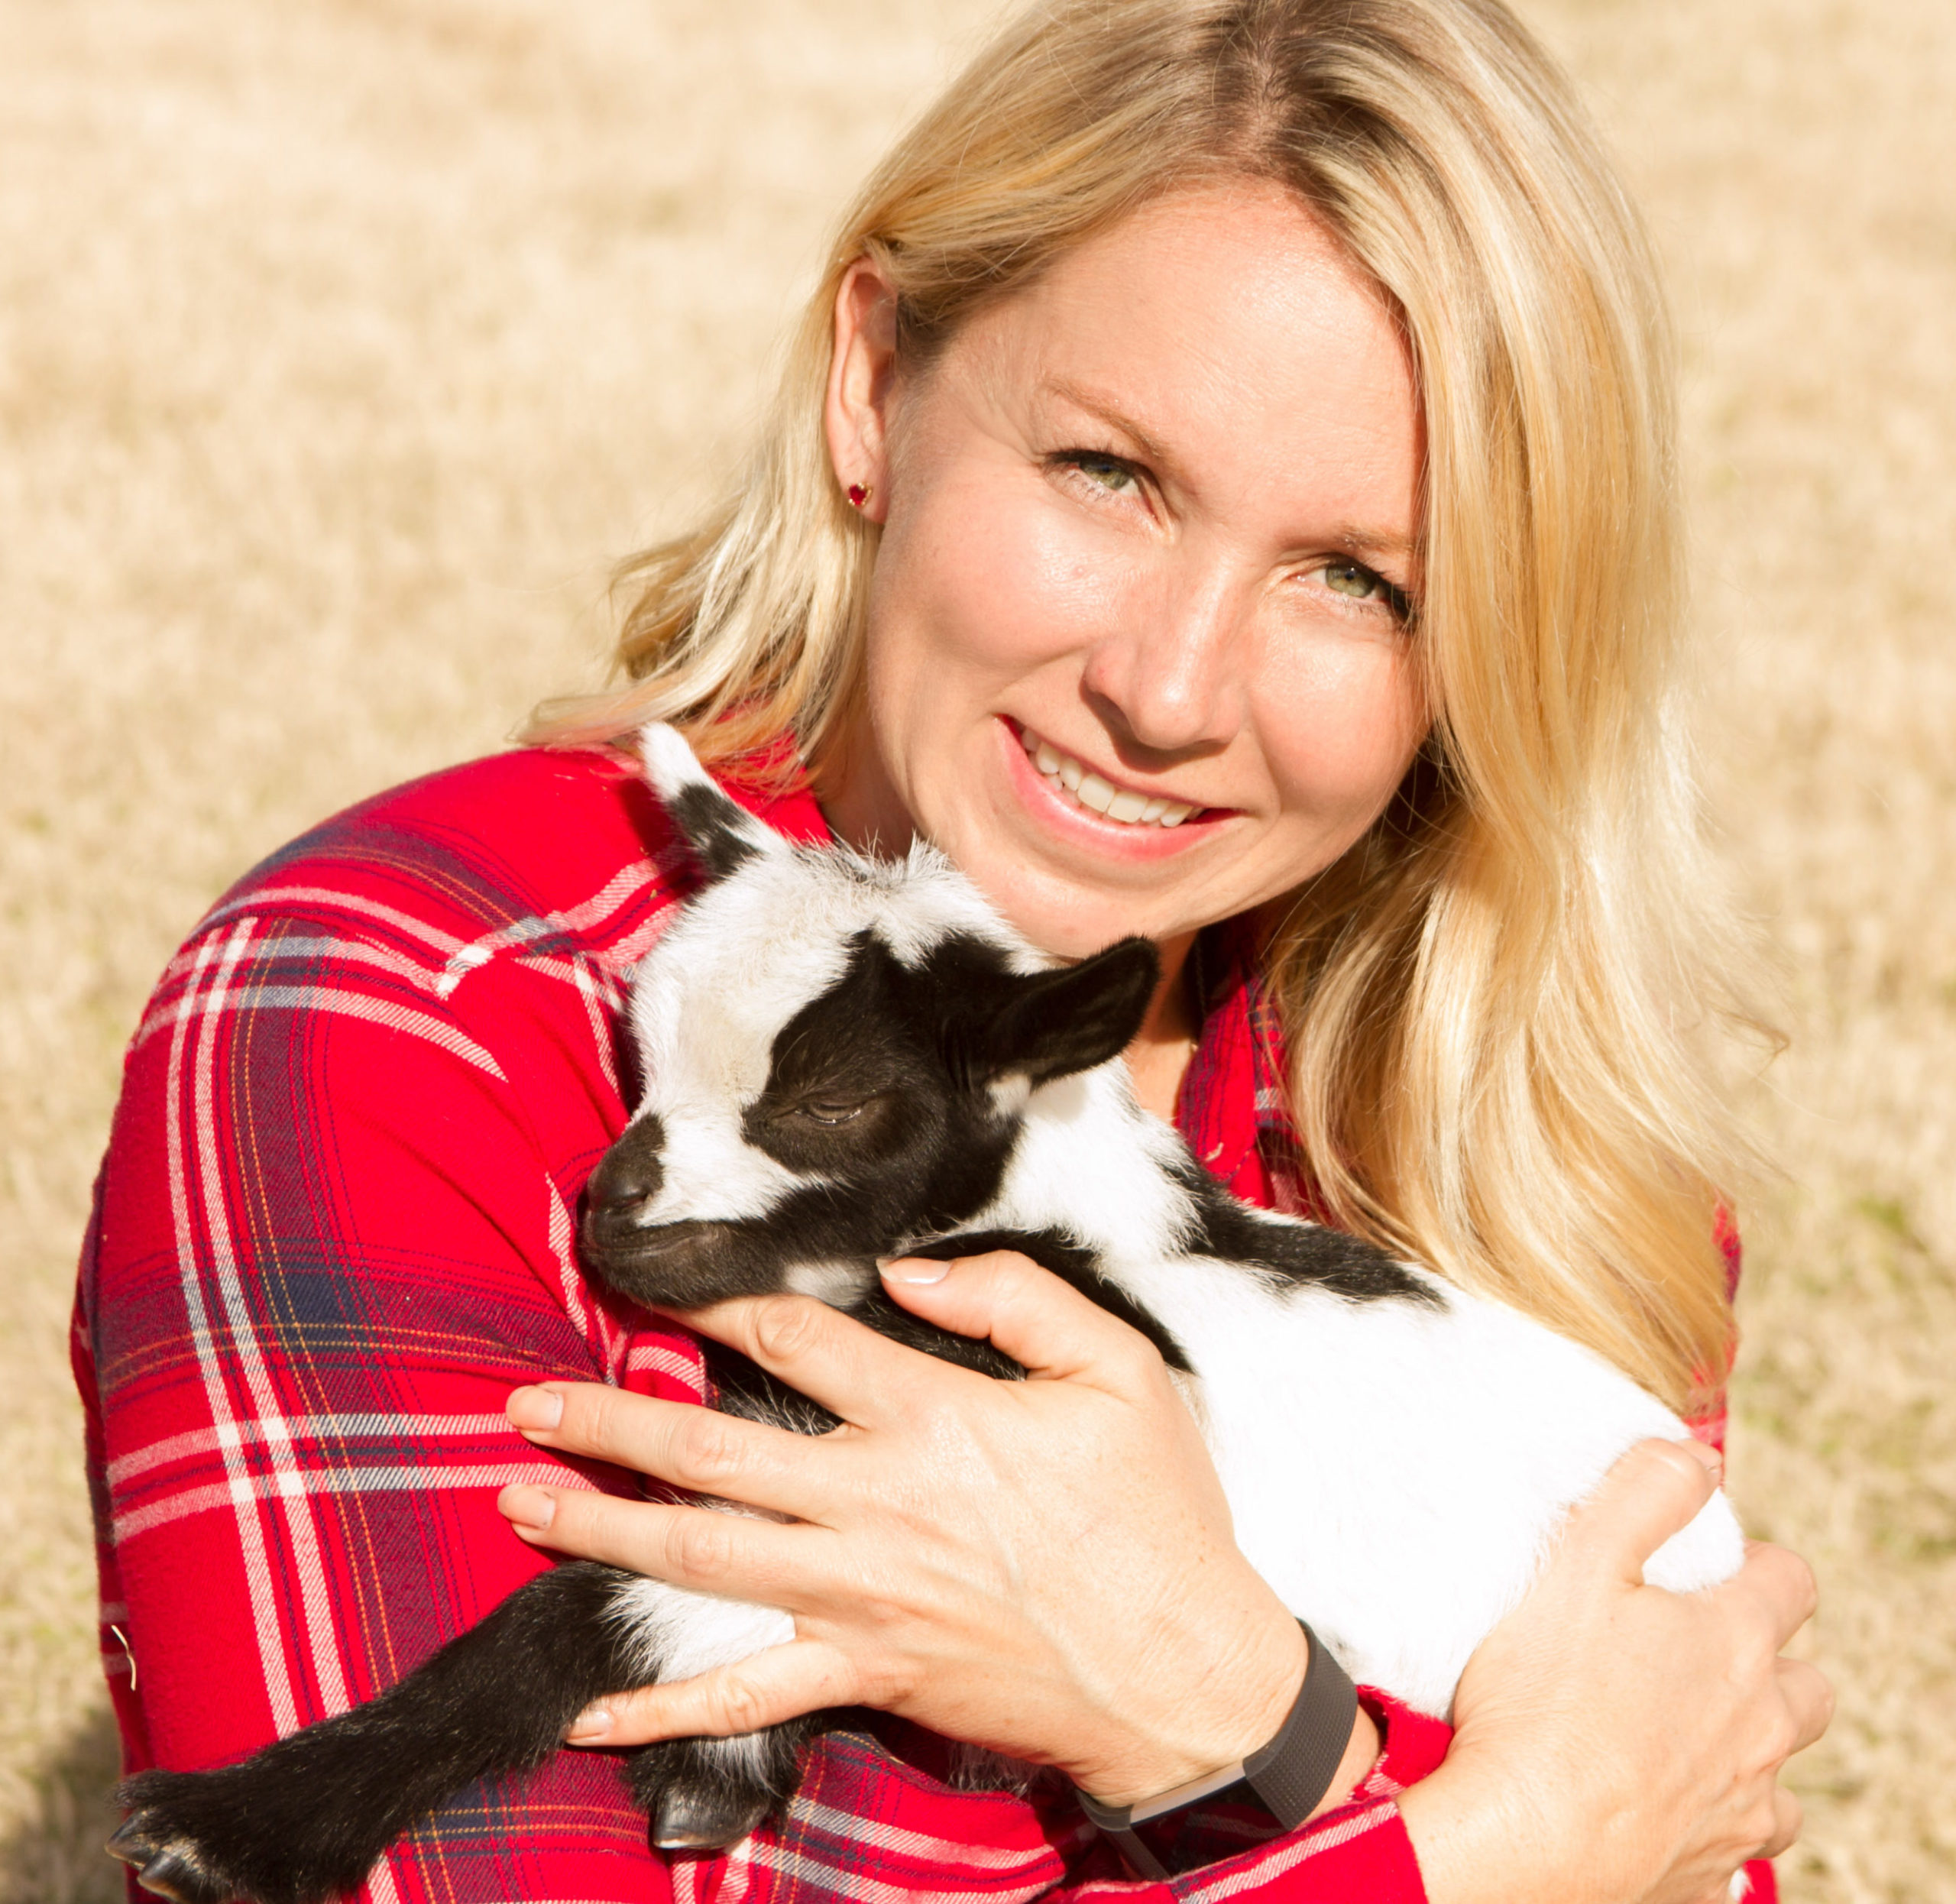 Sarah in a plaid shirt holding a baby goat with yoga